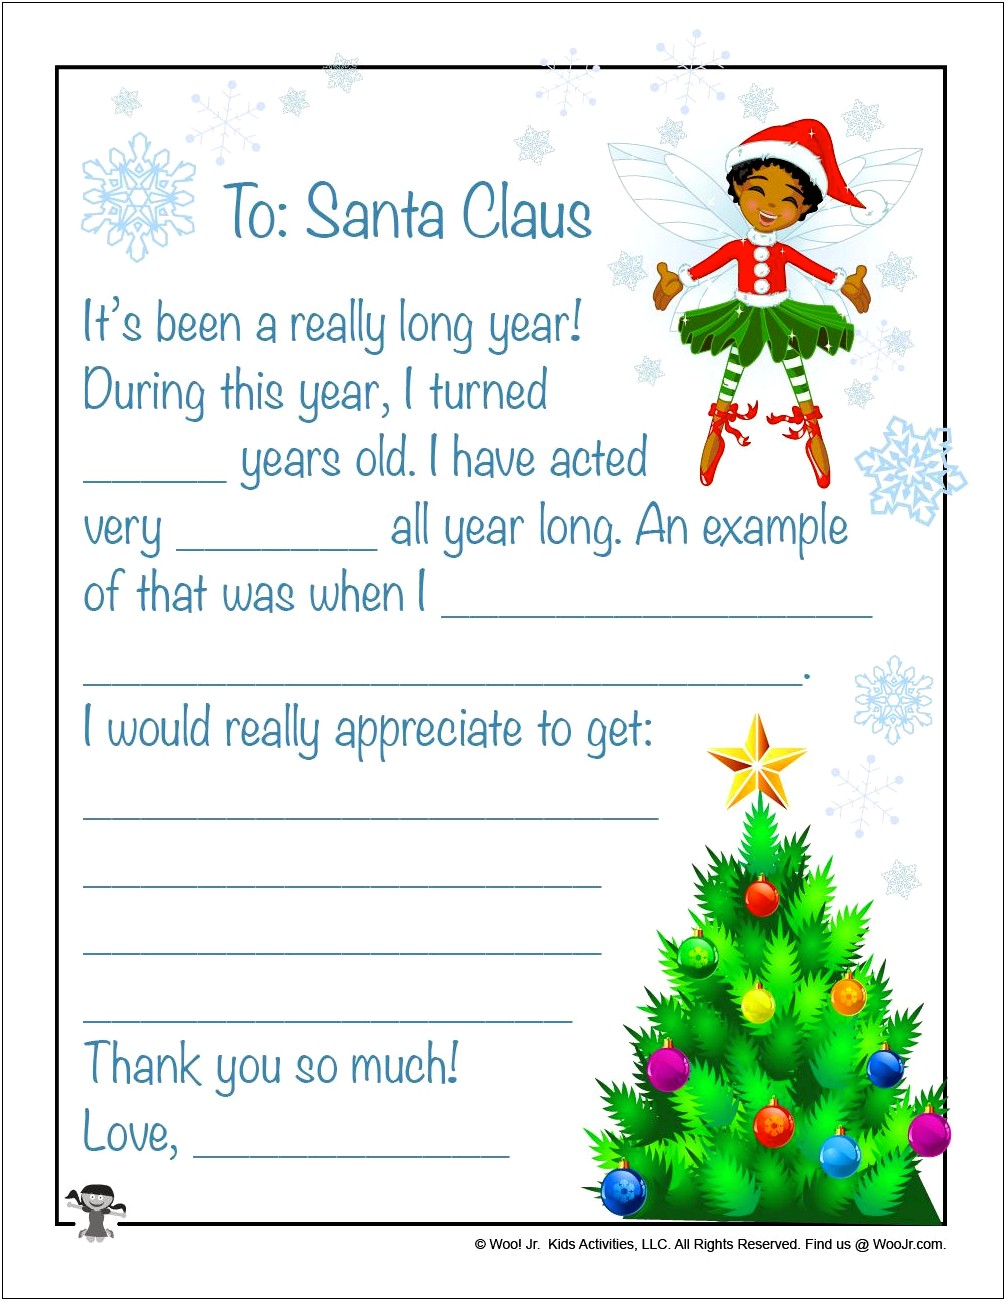 A Letter For Santa Claus Template